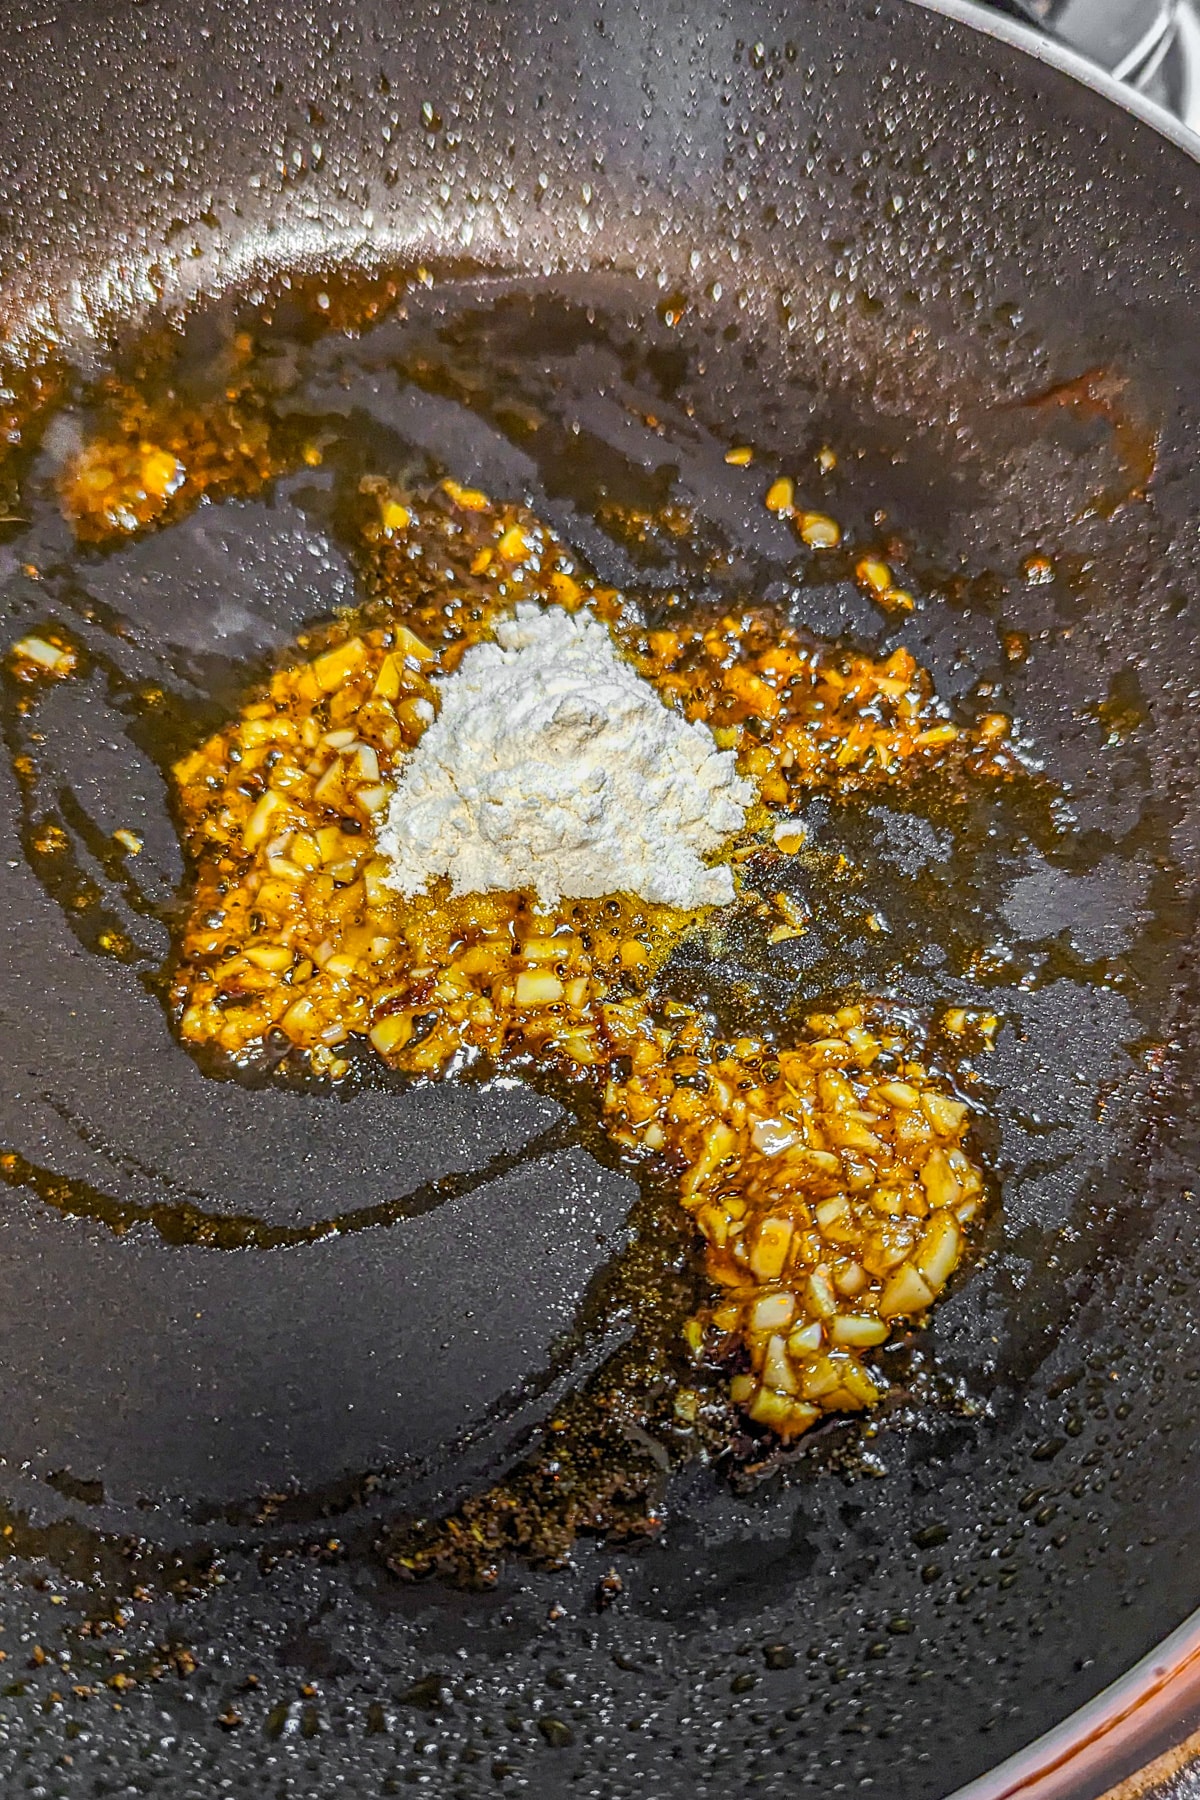 Fried chopped garlic with a pinch of all-purpose flour.